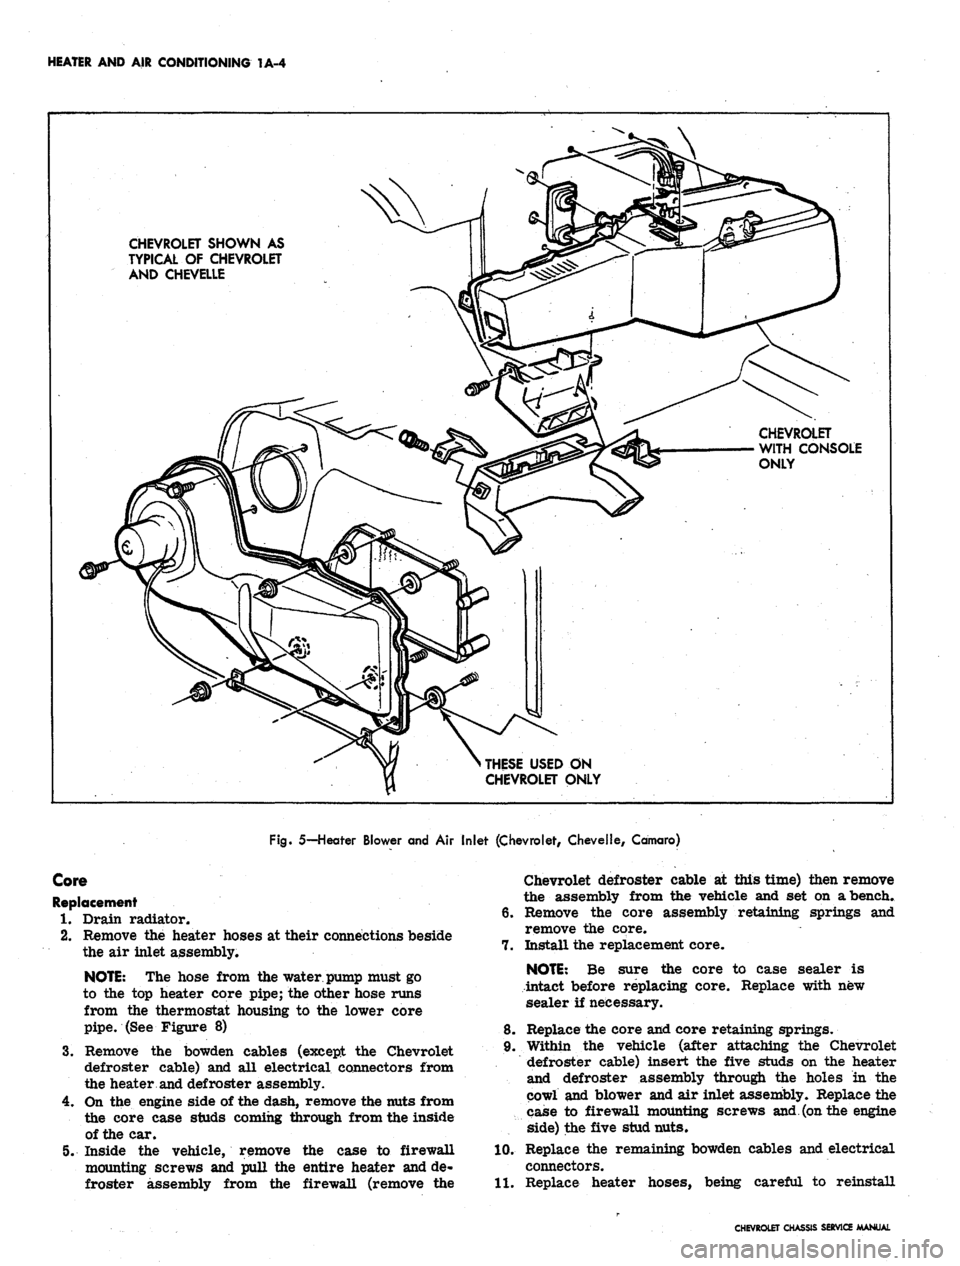 CHEVROLET CAMARO 1967 1.G Chassis User Guide 
HEATER AND AIR CONDITIONING 1A-4

CHEVROLET SHOWN AS

TYPICAL OF CHEVROLET

AND CHEVELLE

CHEVROLET

WITH CONSOLE

ONLY

THESE USED ON

CHEVROLET ONLY

Fig. 5— Heater Blower and
 Air
 Inlet (Chevro